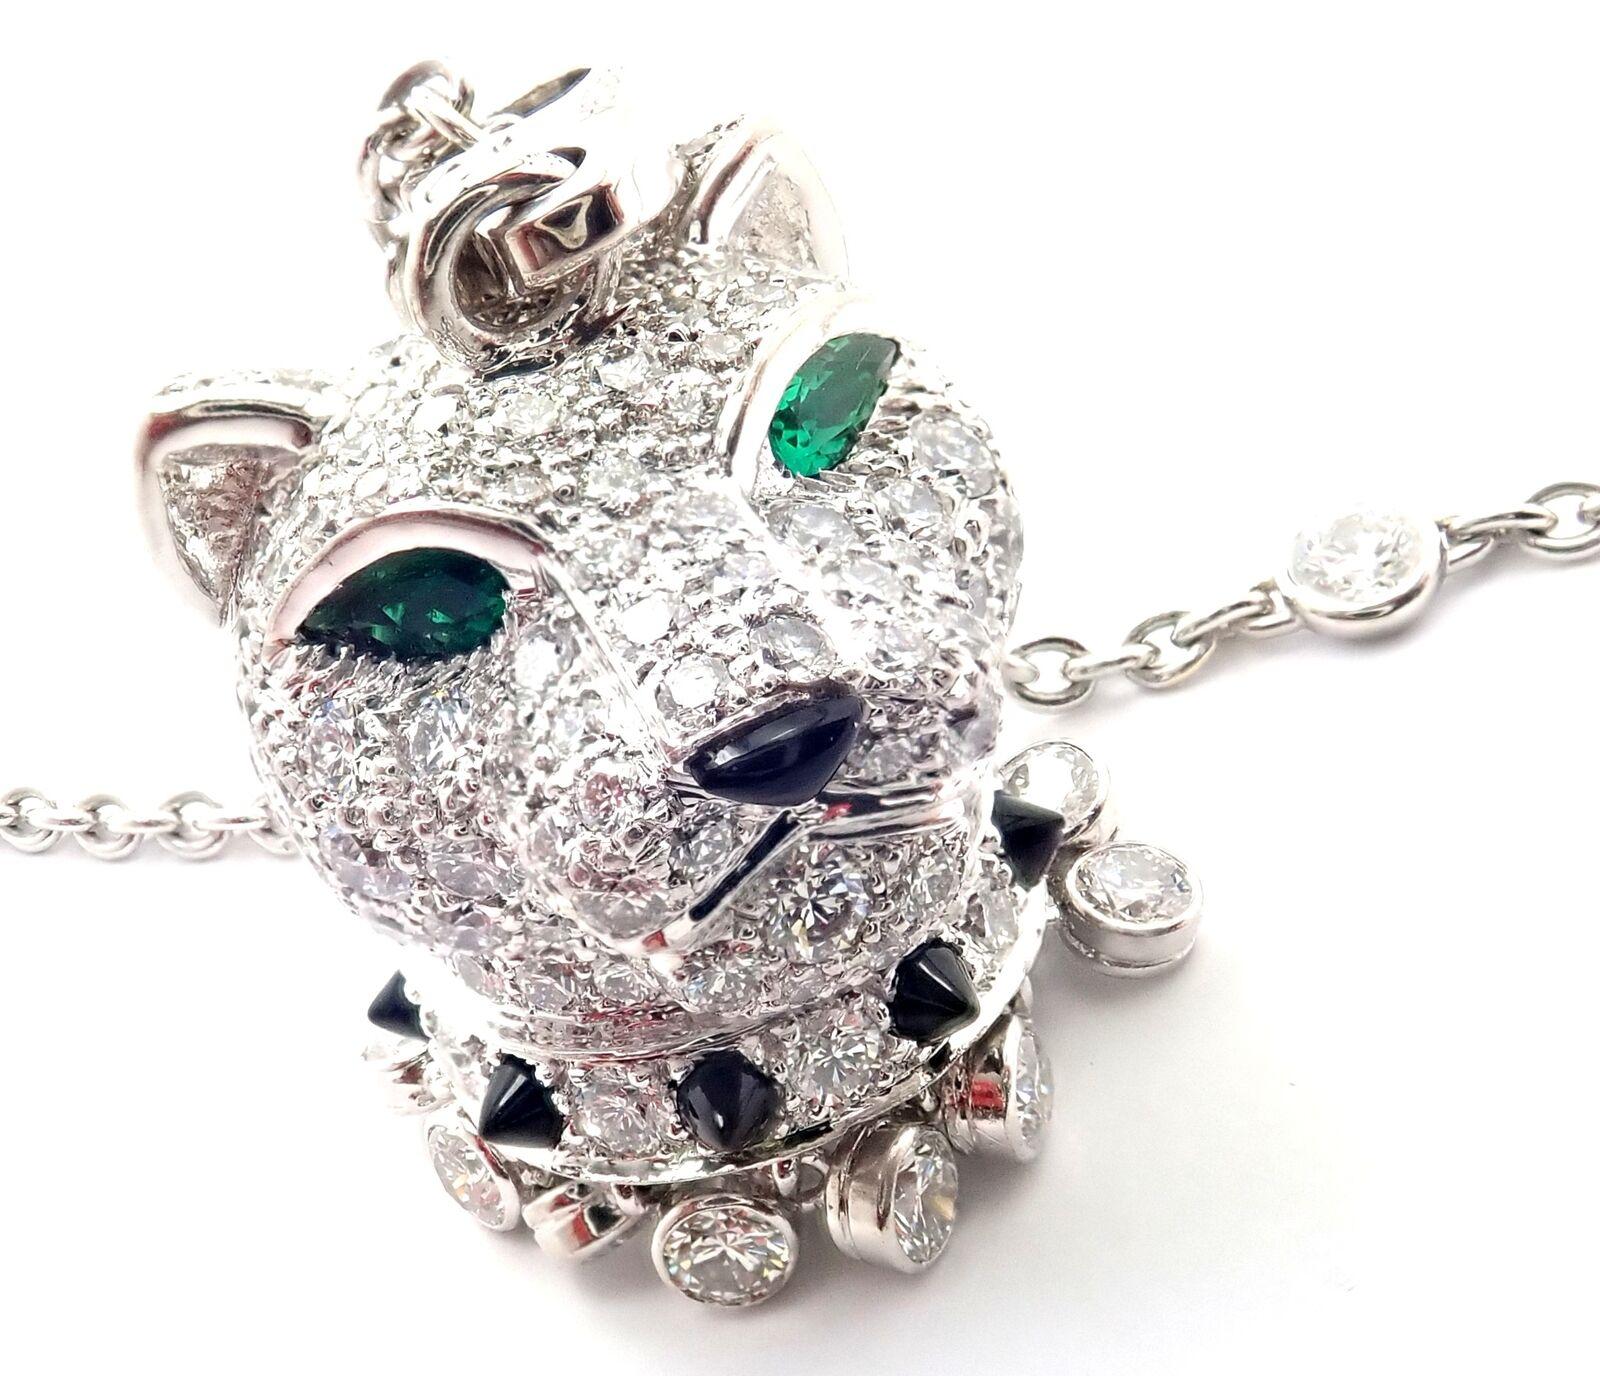 18k White Gold Diamond Emerald Onyx Panther Panthere Pendant Necklace by Cartier.
With Pendant Round brilliant cut diamonds VVS1 clarity E color total weight approximately 5ct
2 emeralds in the eyes
1 onyx nose
Chain 12 round brilliant cut diamonds